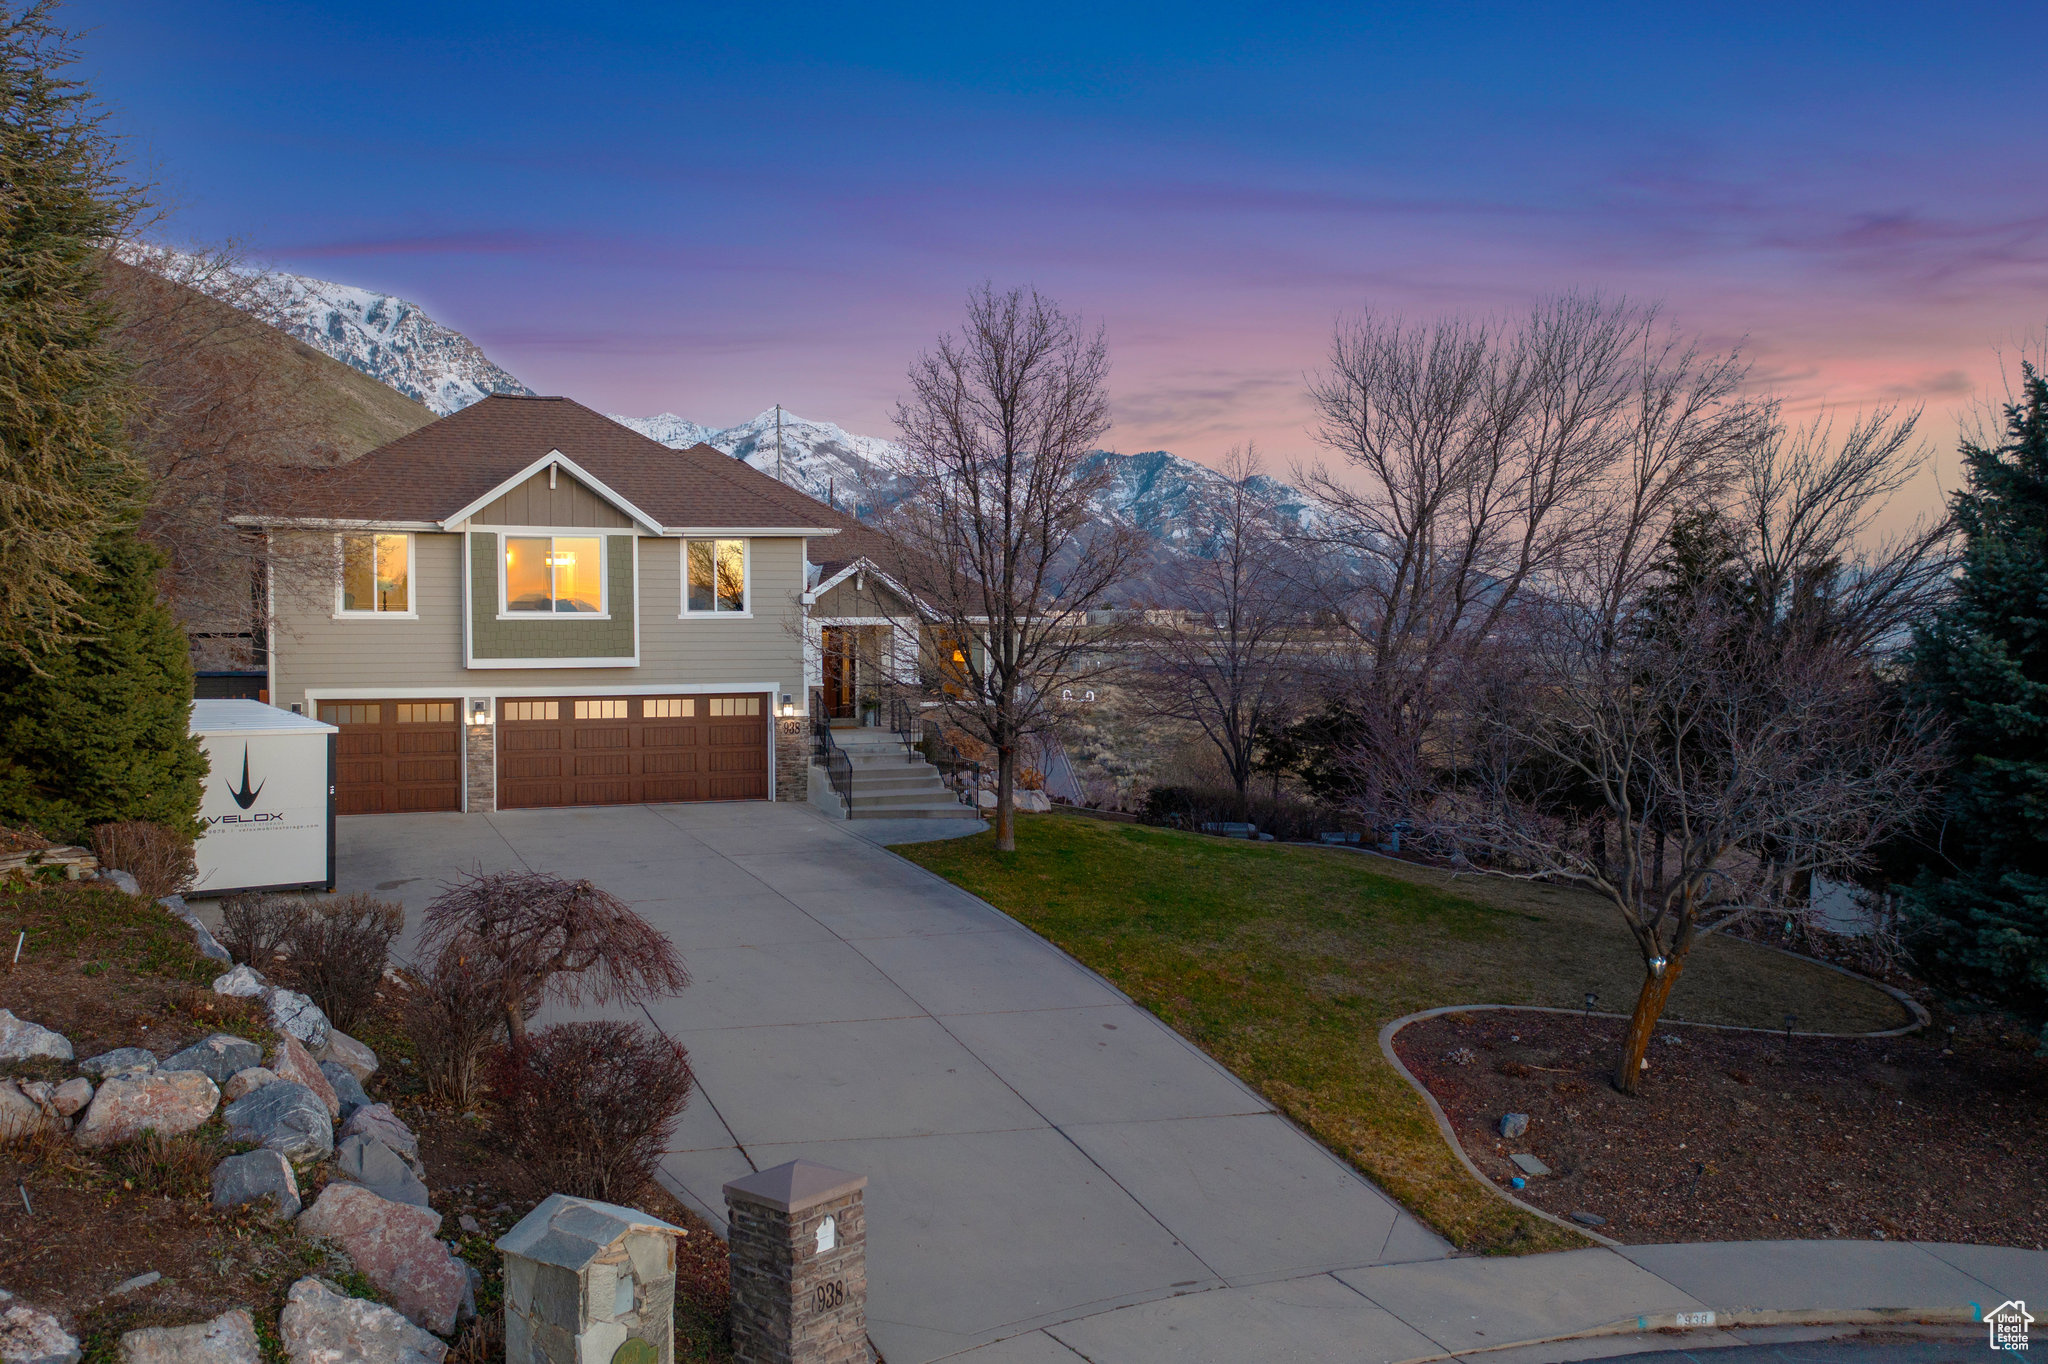 938 E HIGH COUNTRY, Orem, Utah 84097, 5 Bedrooms Bedrooms, 20 Rooms Rooms,3 BathroomsBathrooms,Residential,For sale,HIGH COUNTRY,1987241